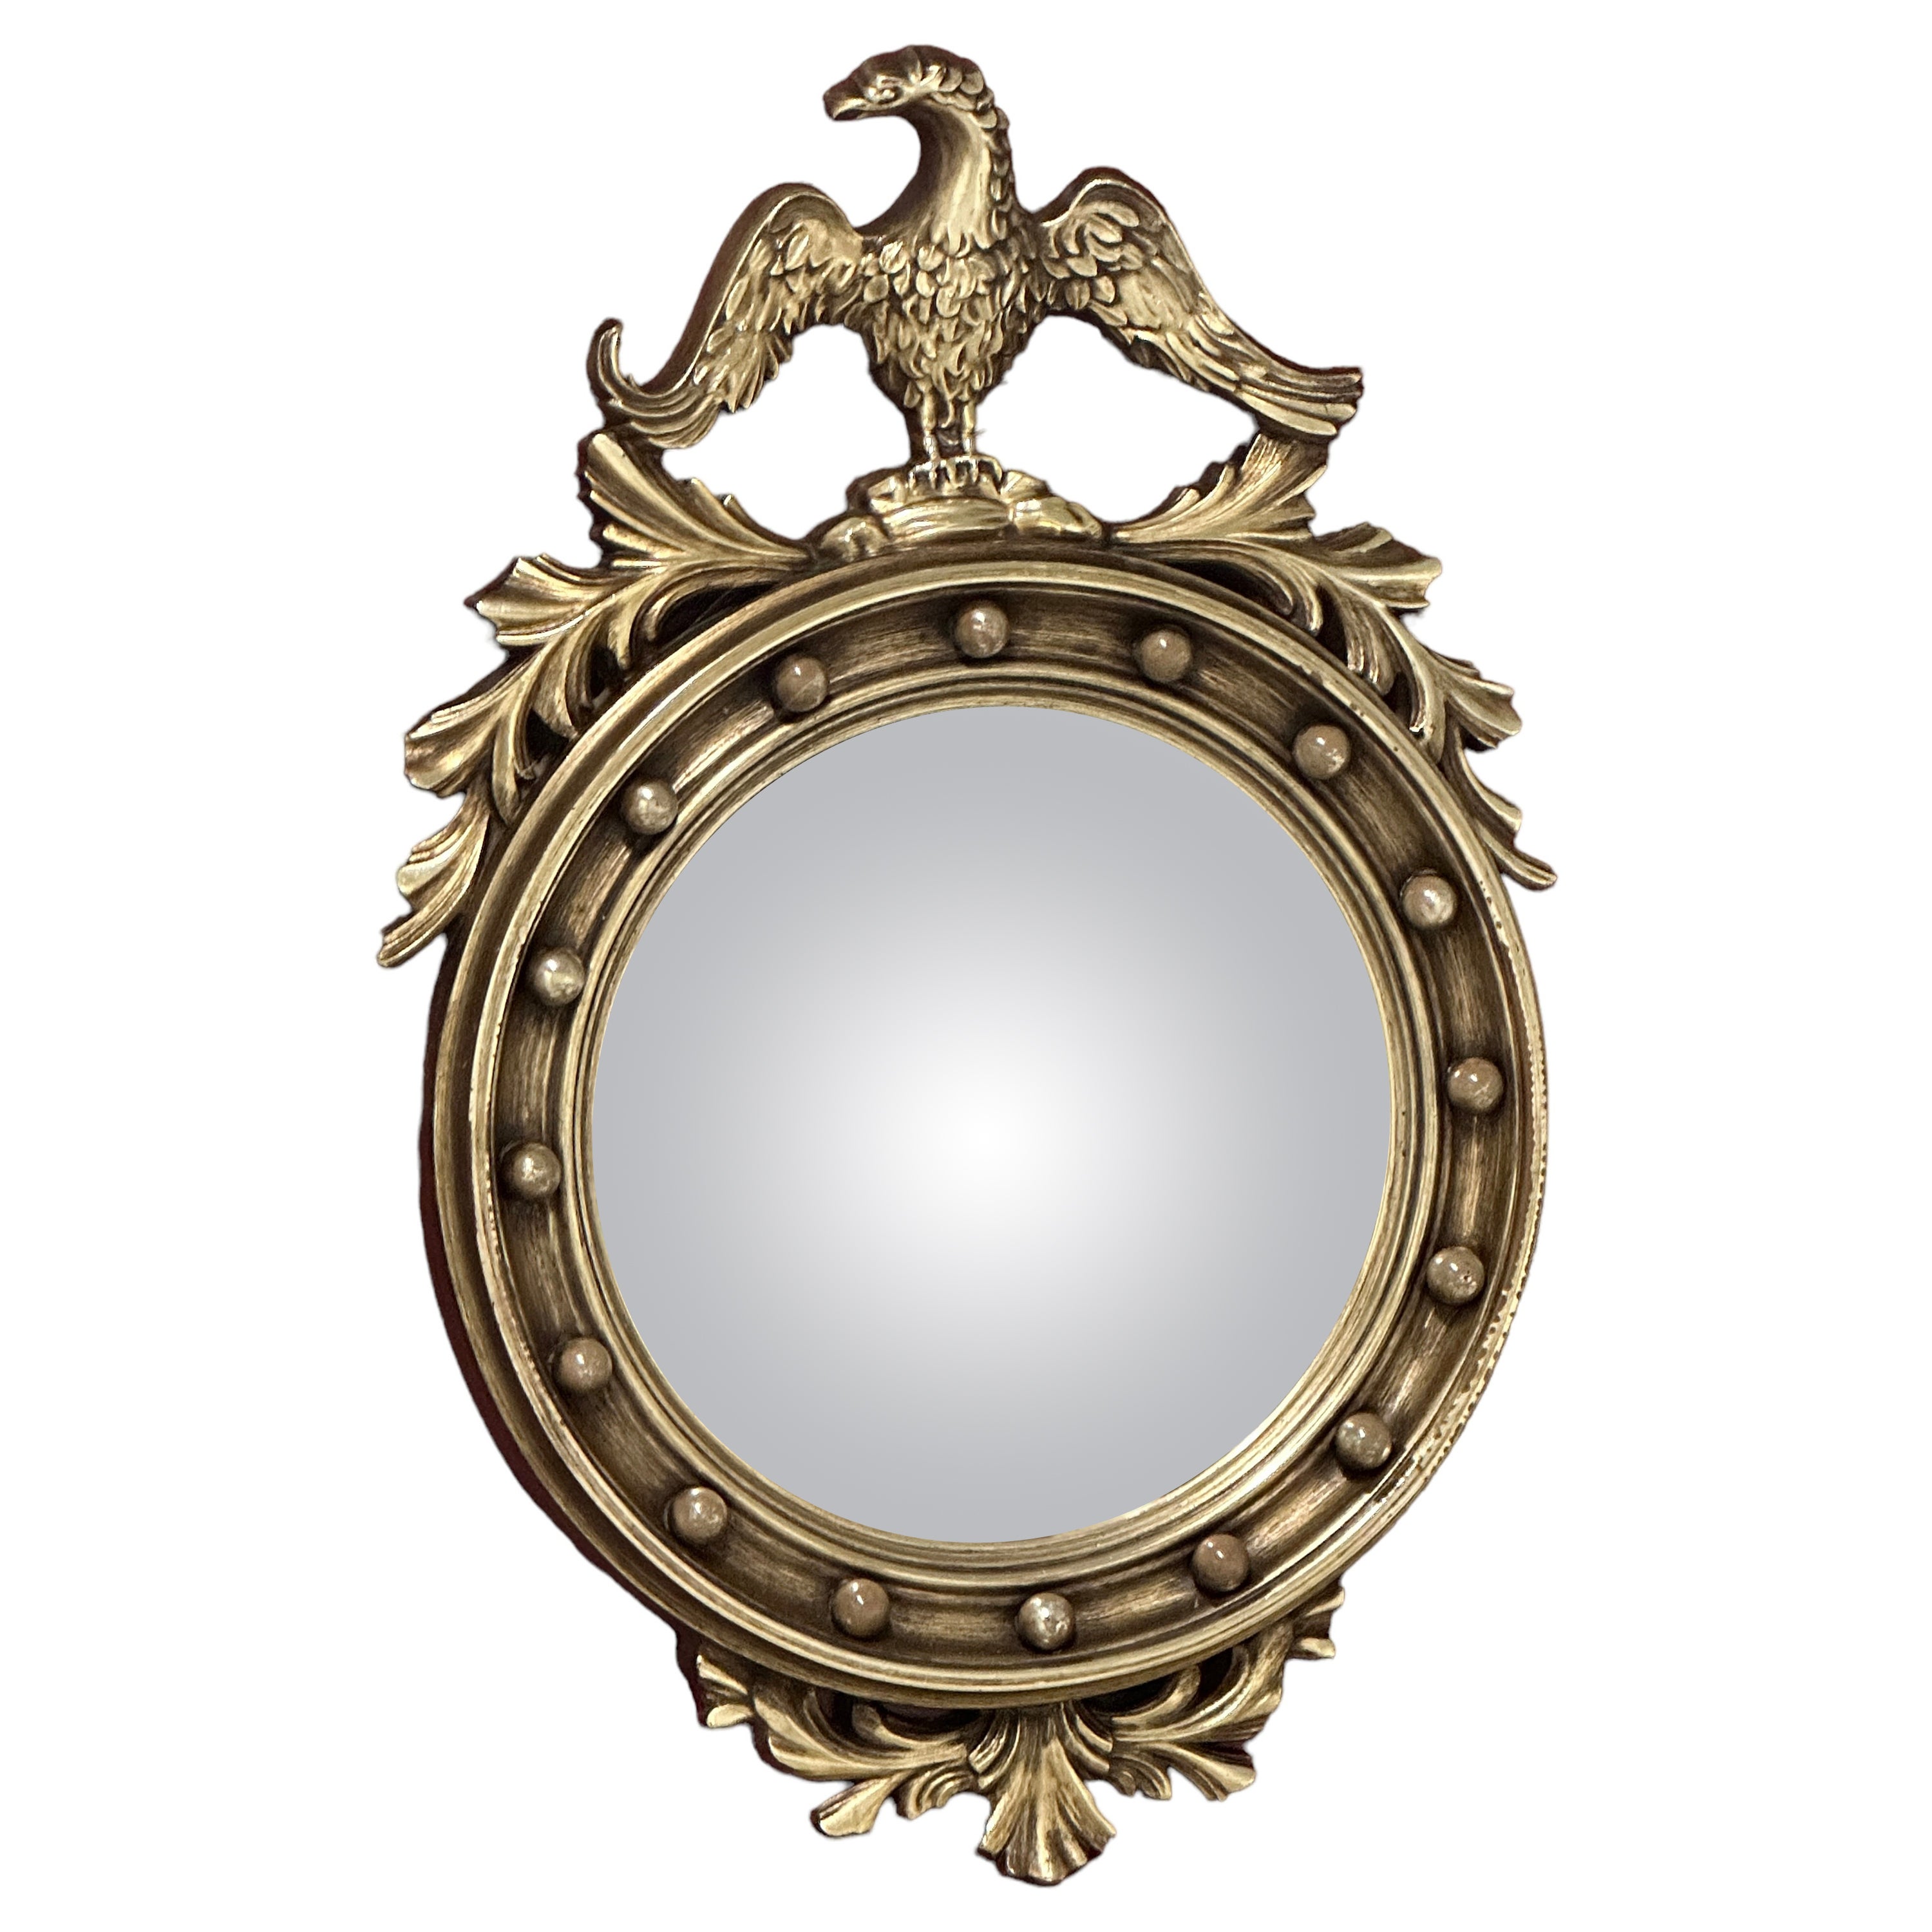 When were federal mirrors made?